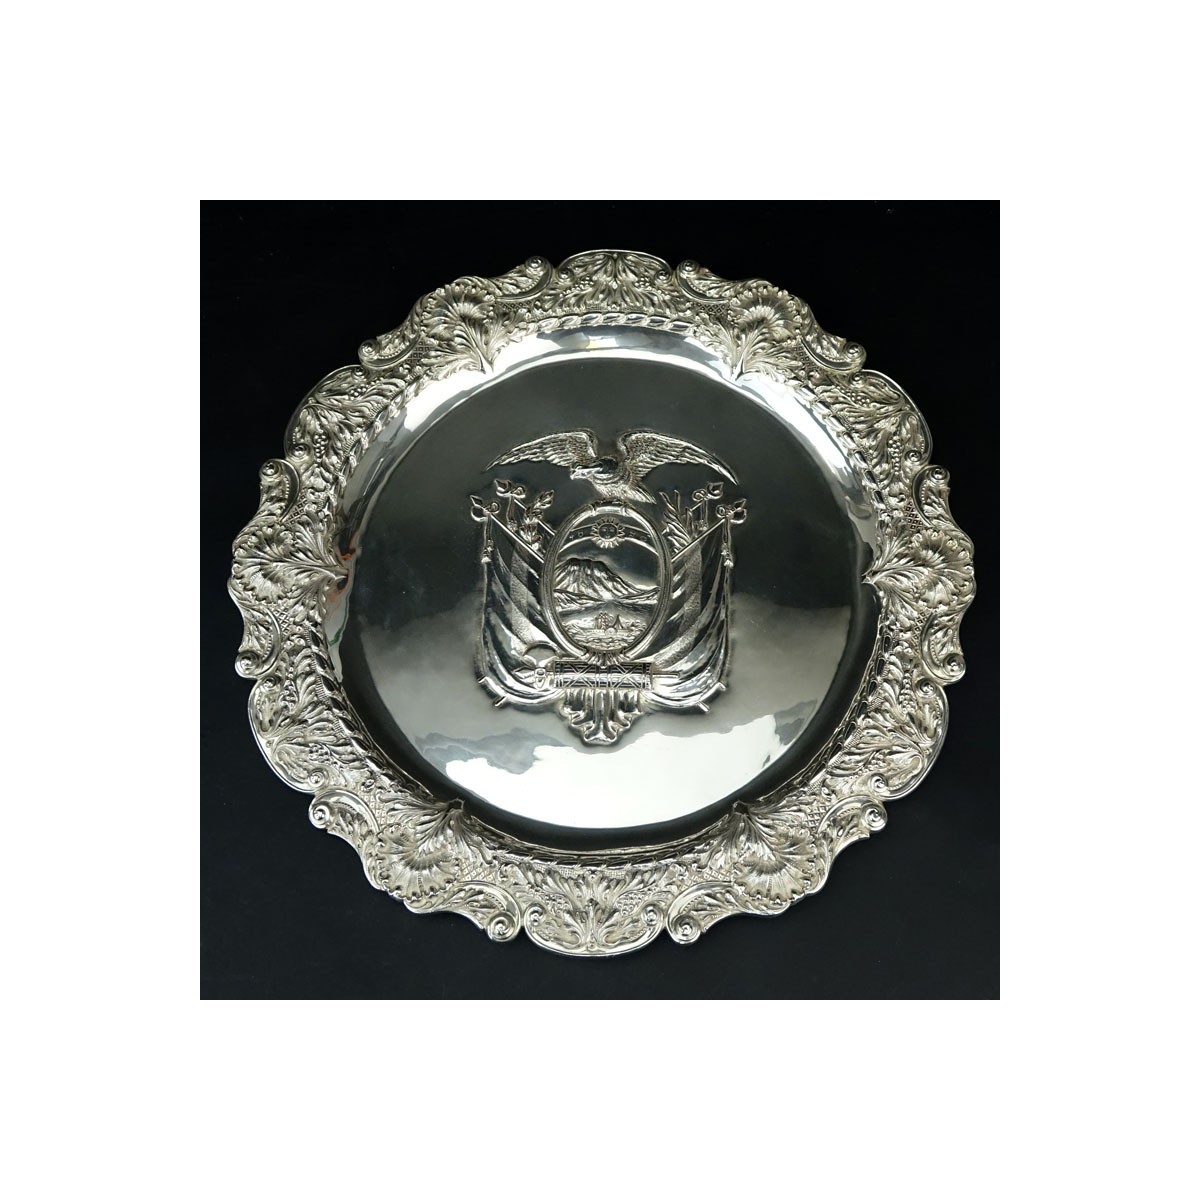 Vintage Silver Ecuador Coat of Arms Repousse Tray. Unsigned, J. Espinosa sticker label affixed en v